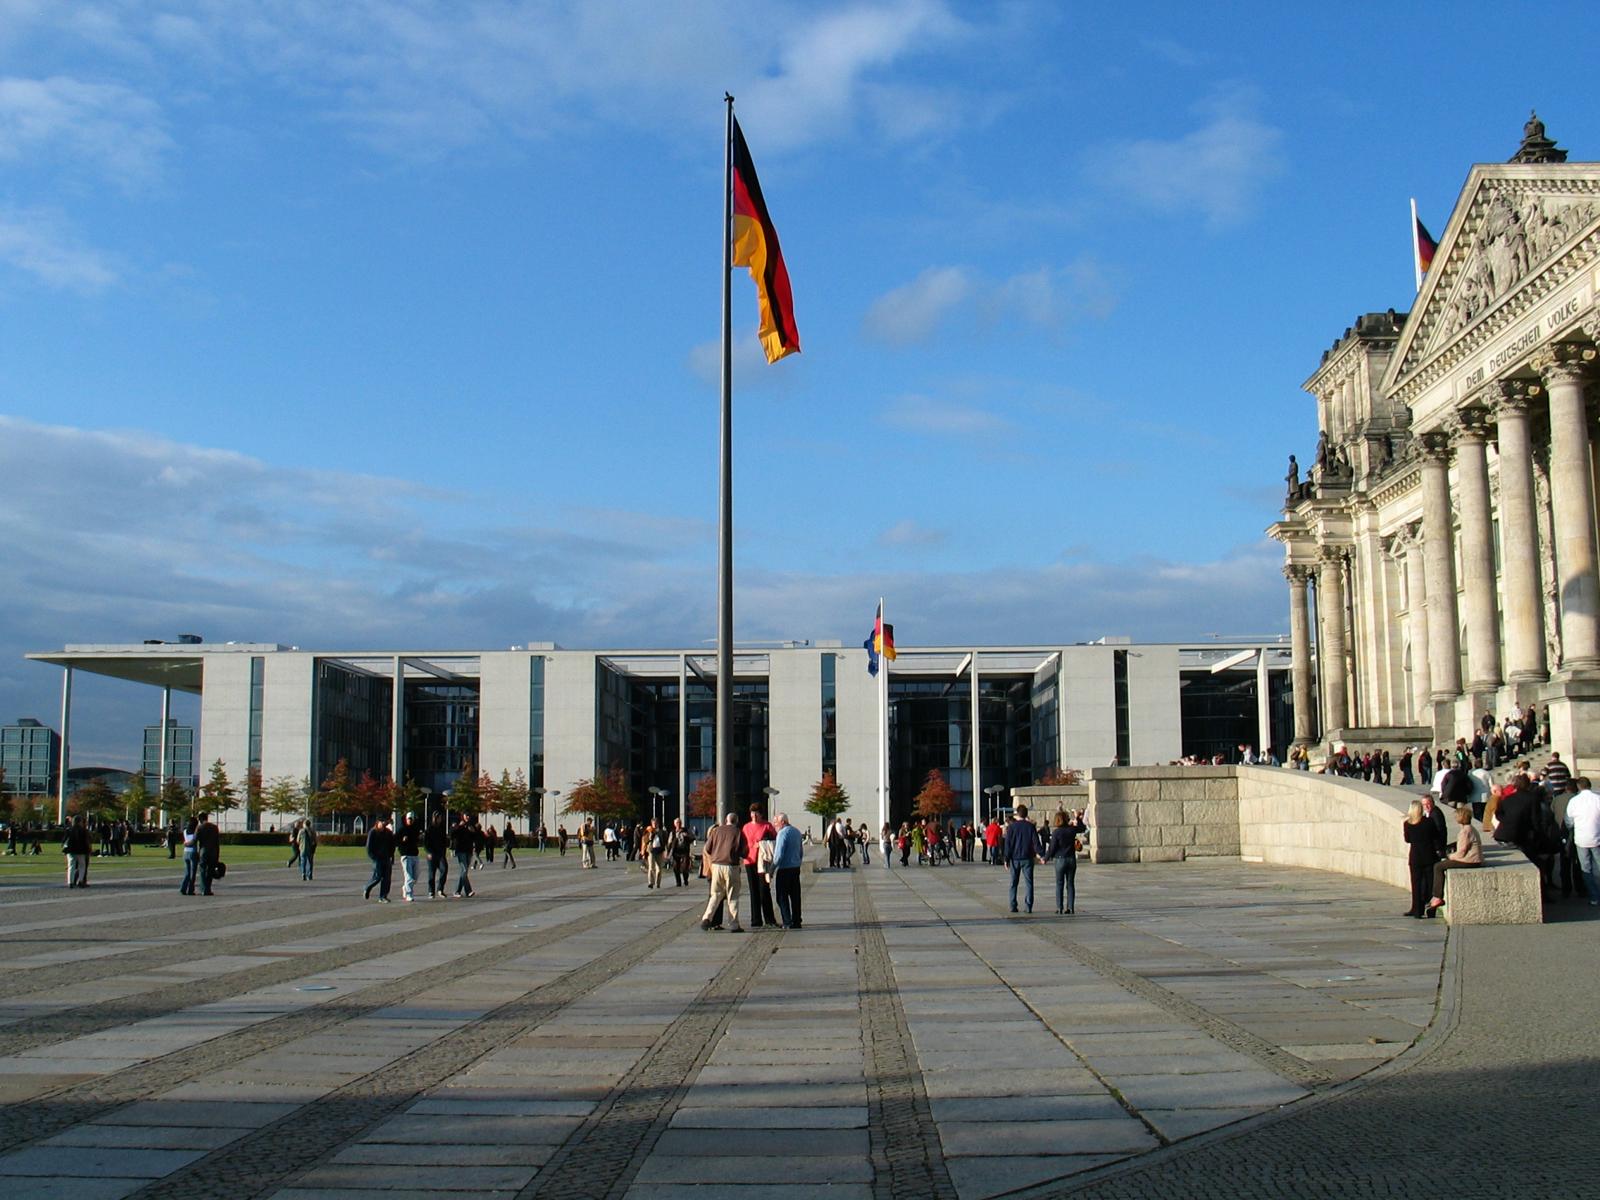 The Reichstag and some other building